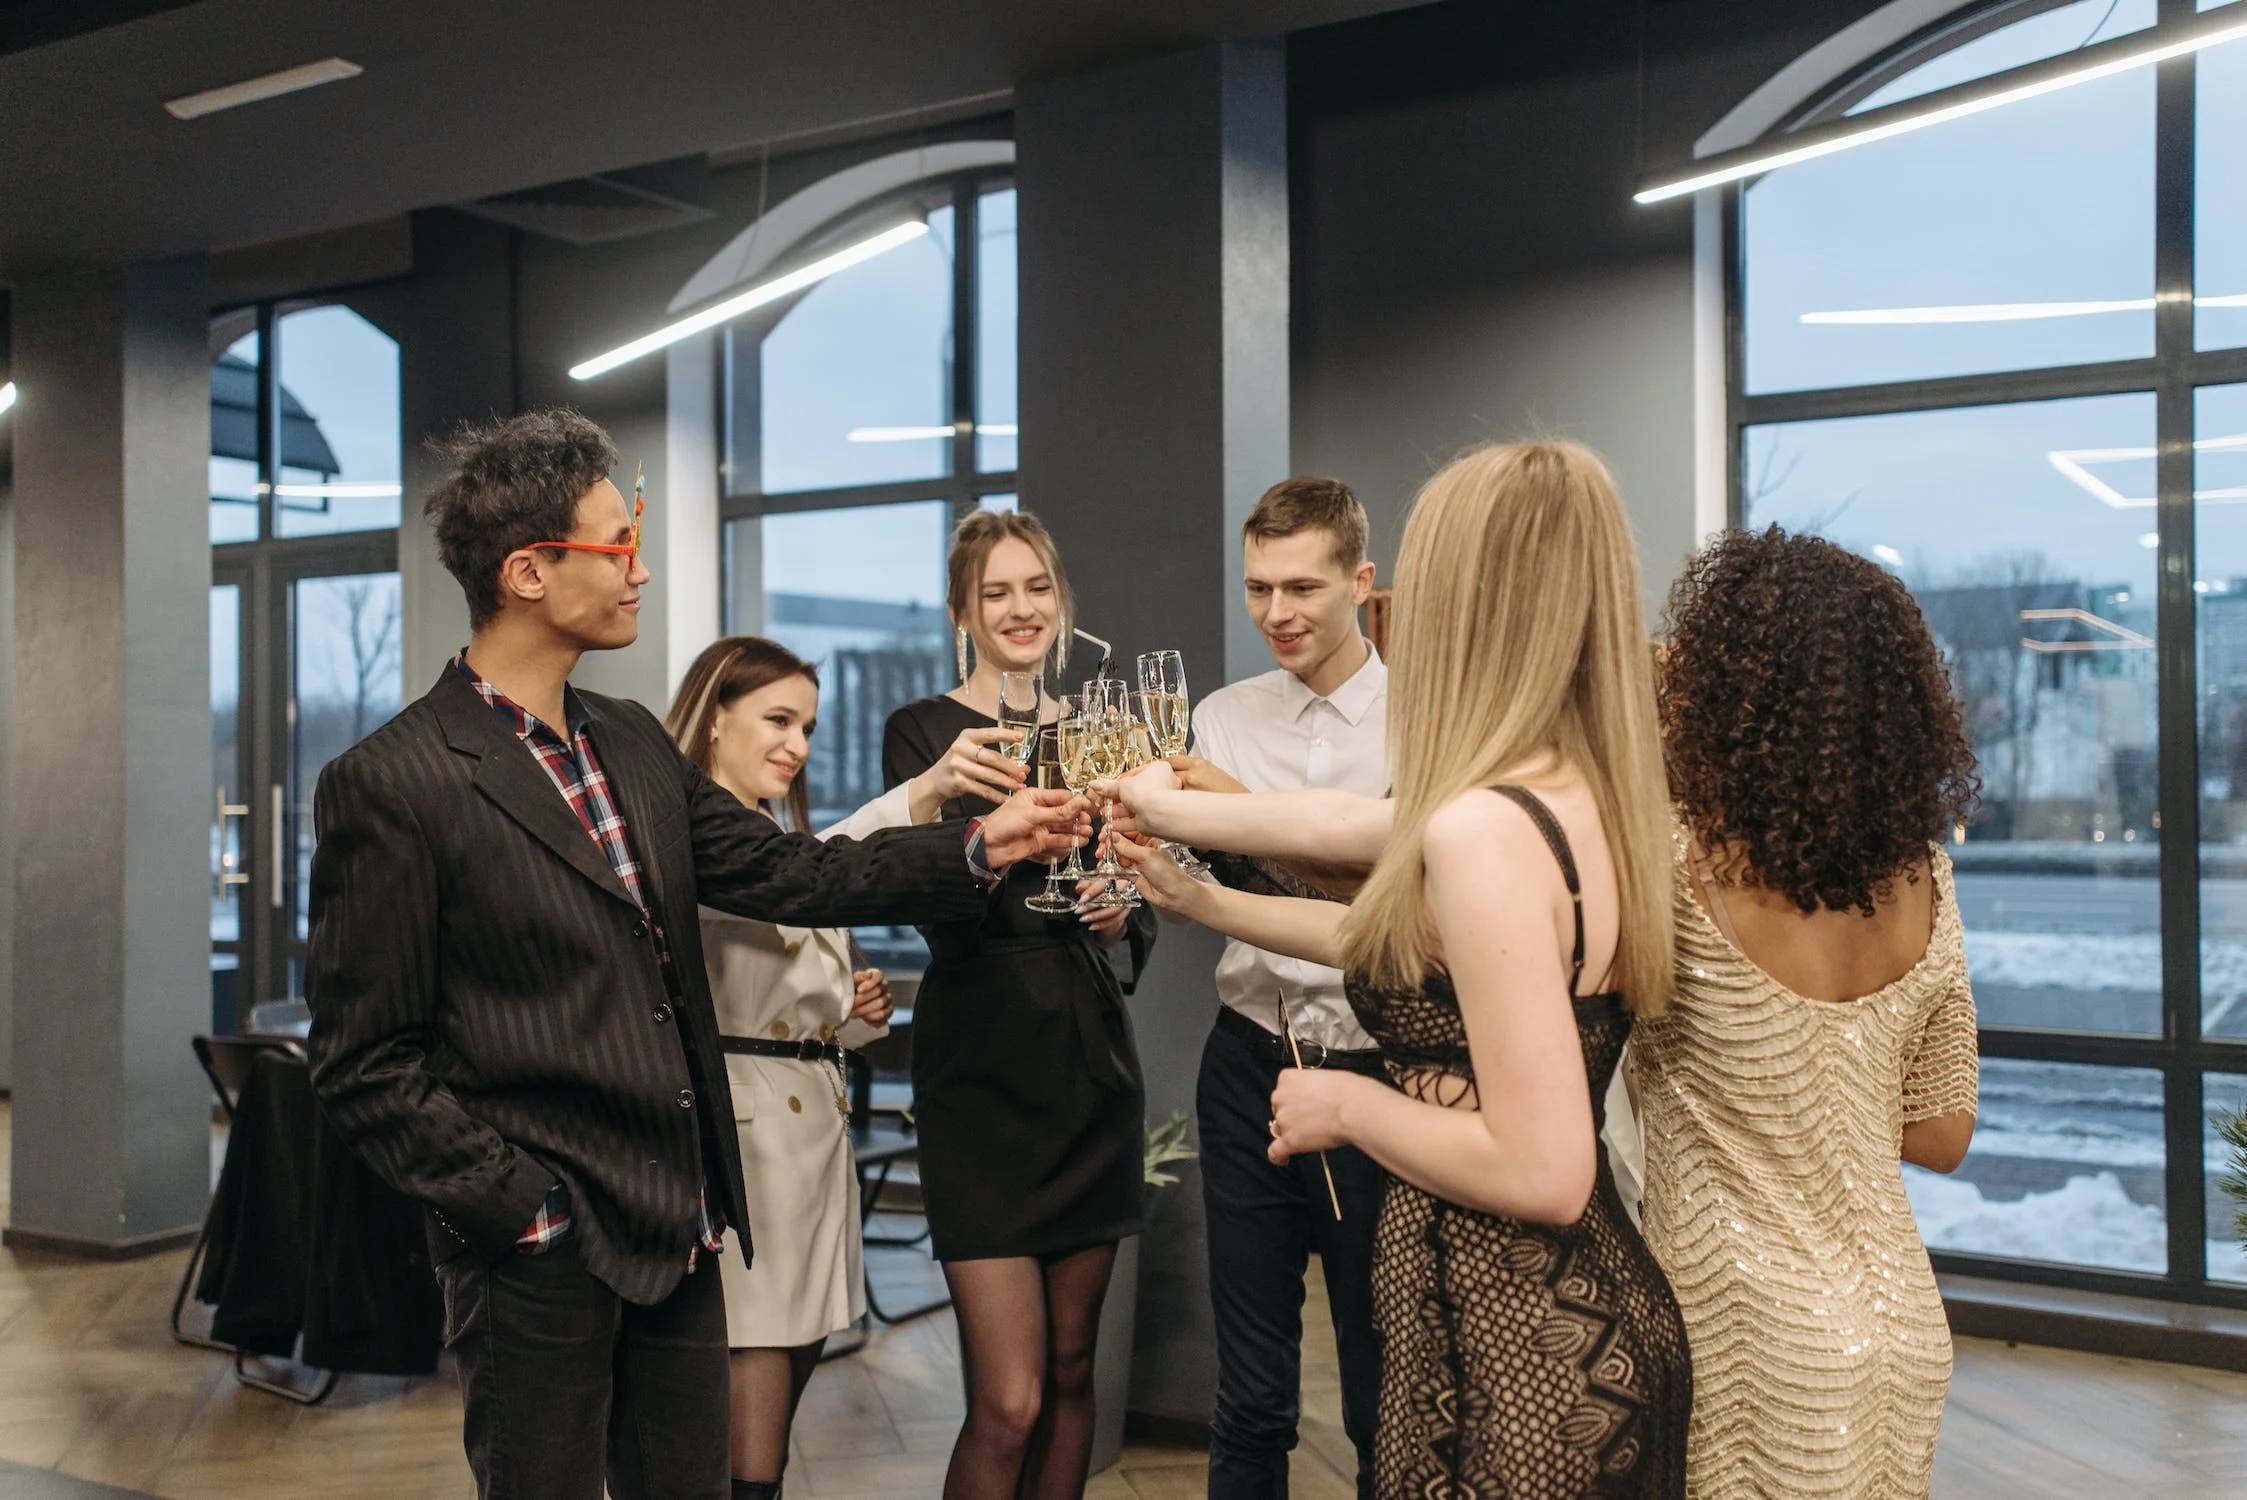 Men and Women toasting in the office